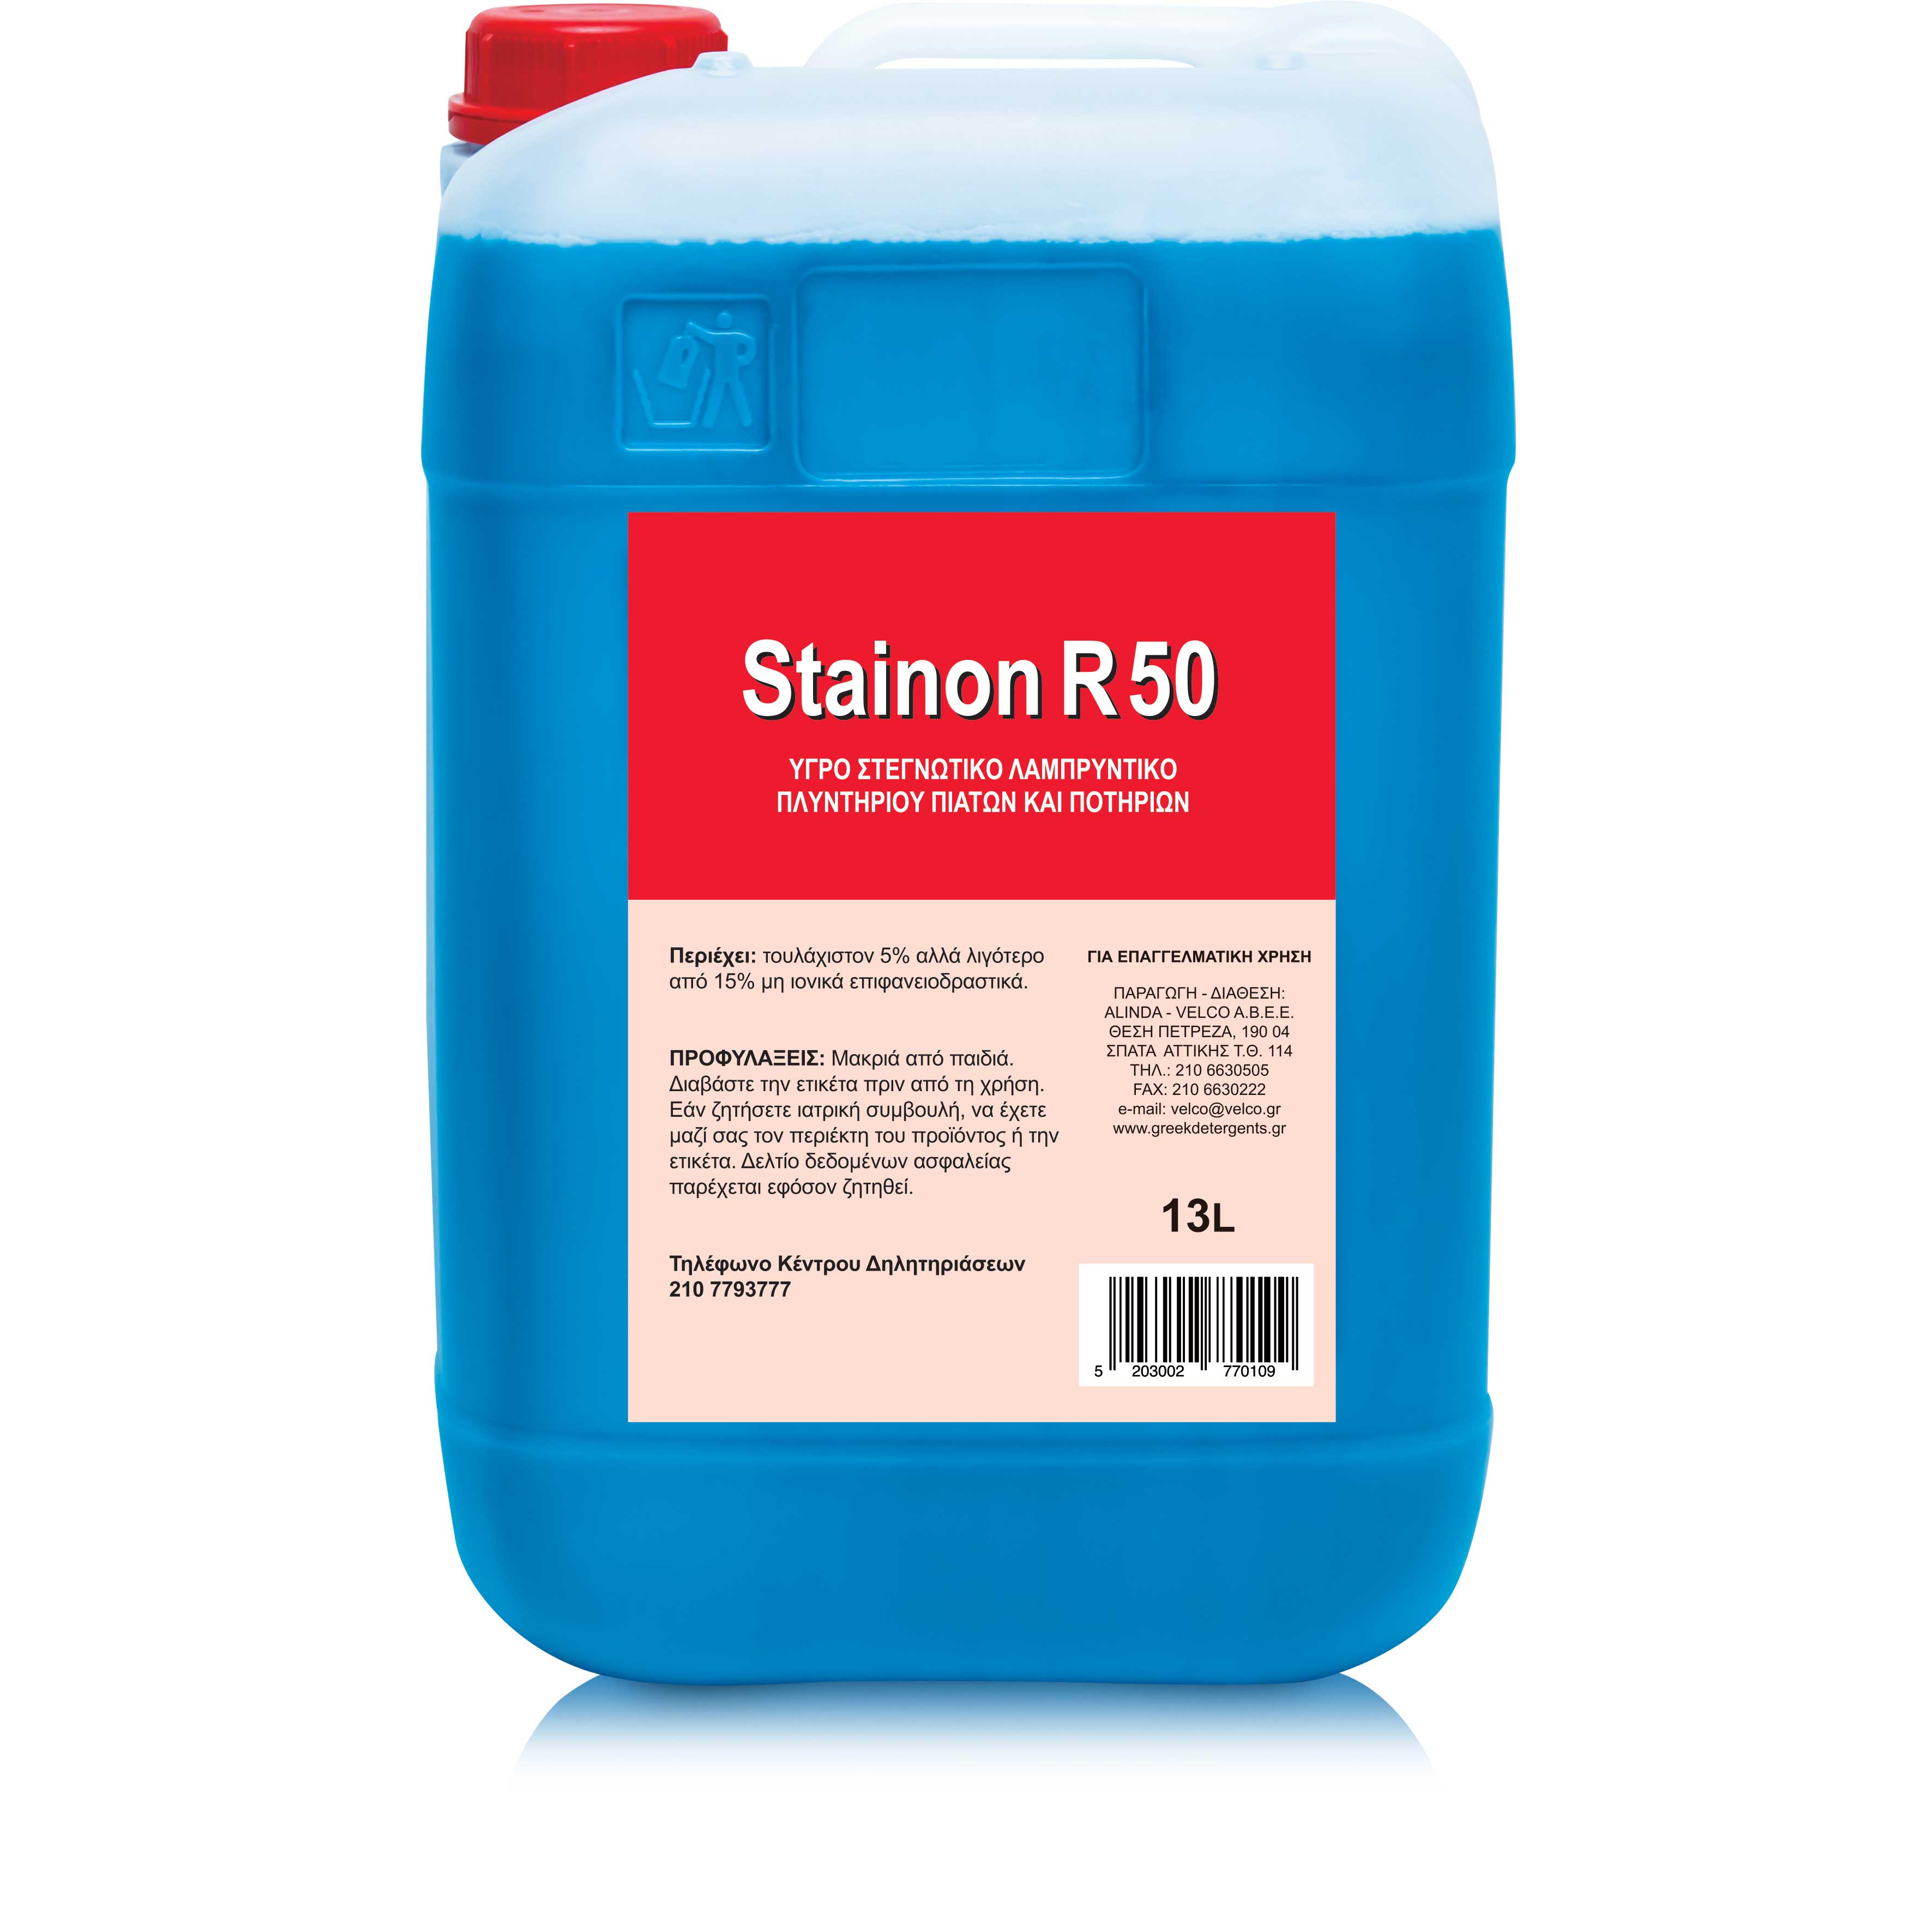 STAINON R50 DISHWASHER RINSE AID 13LTR